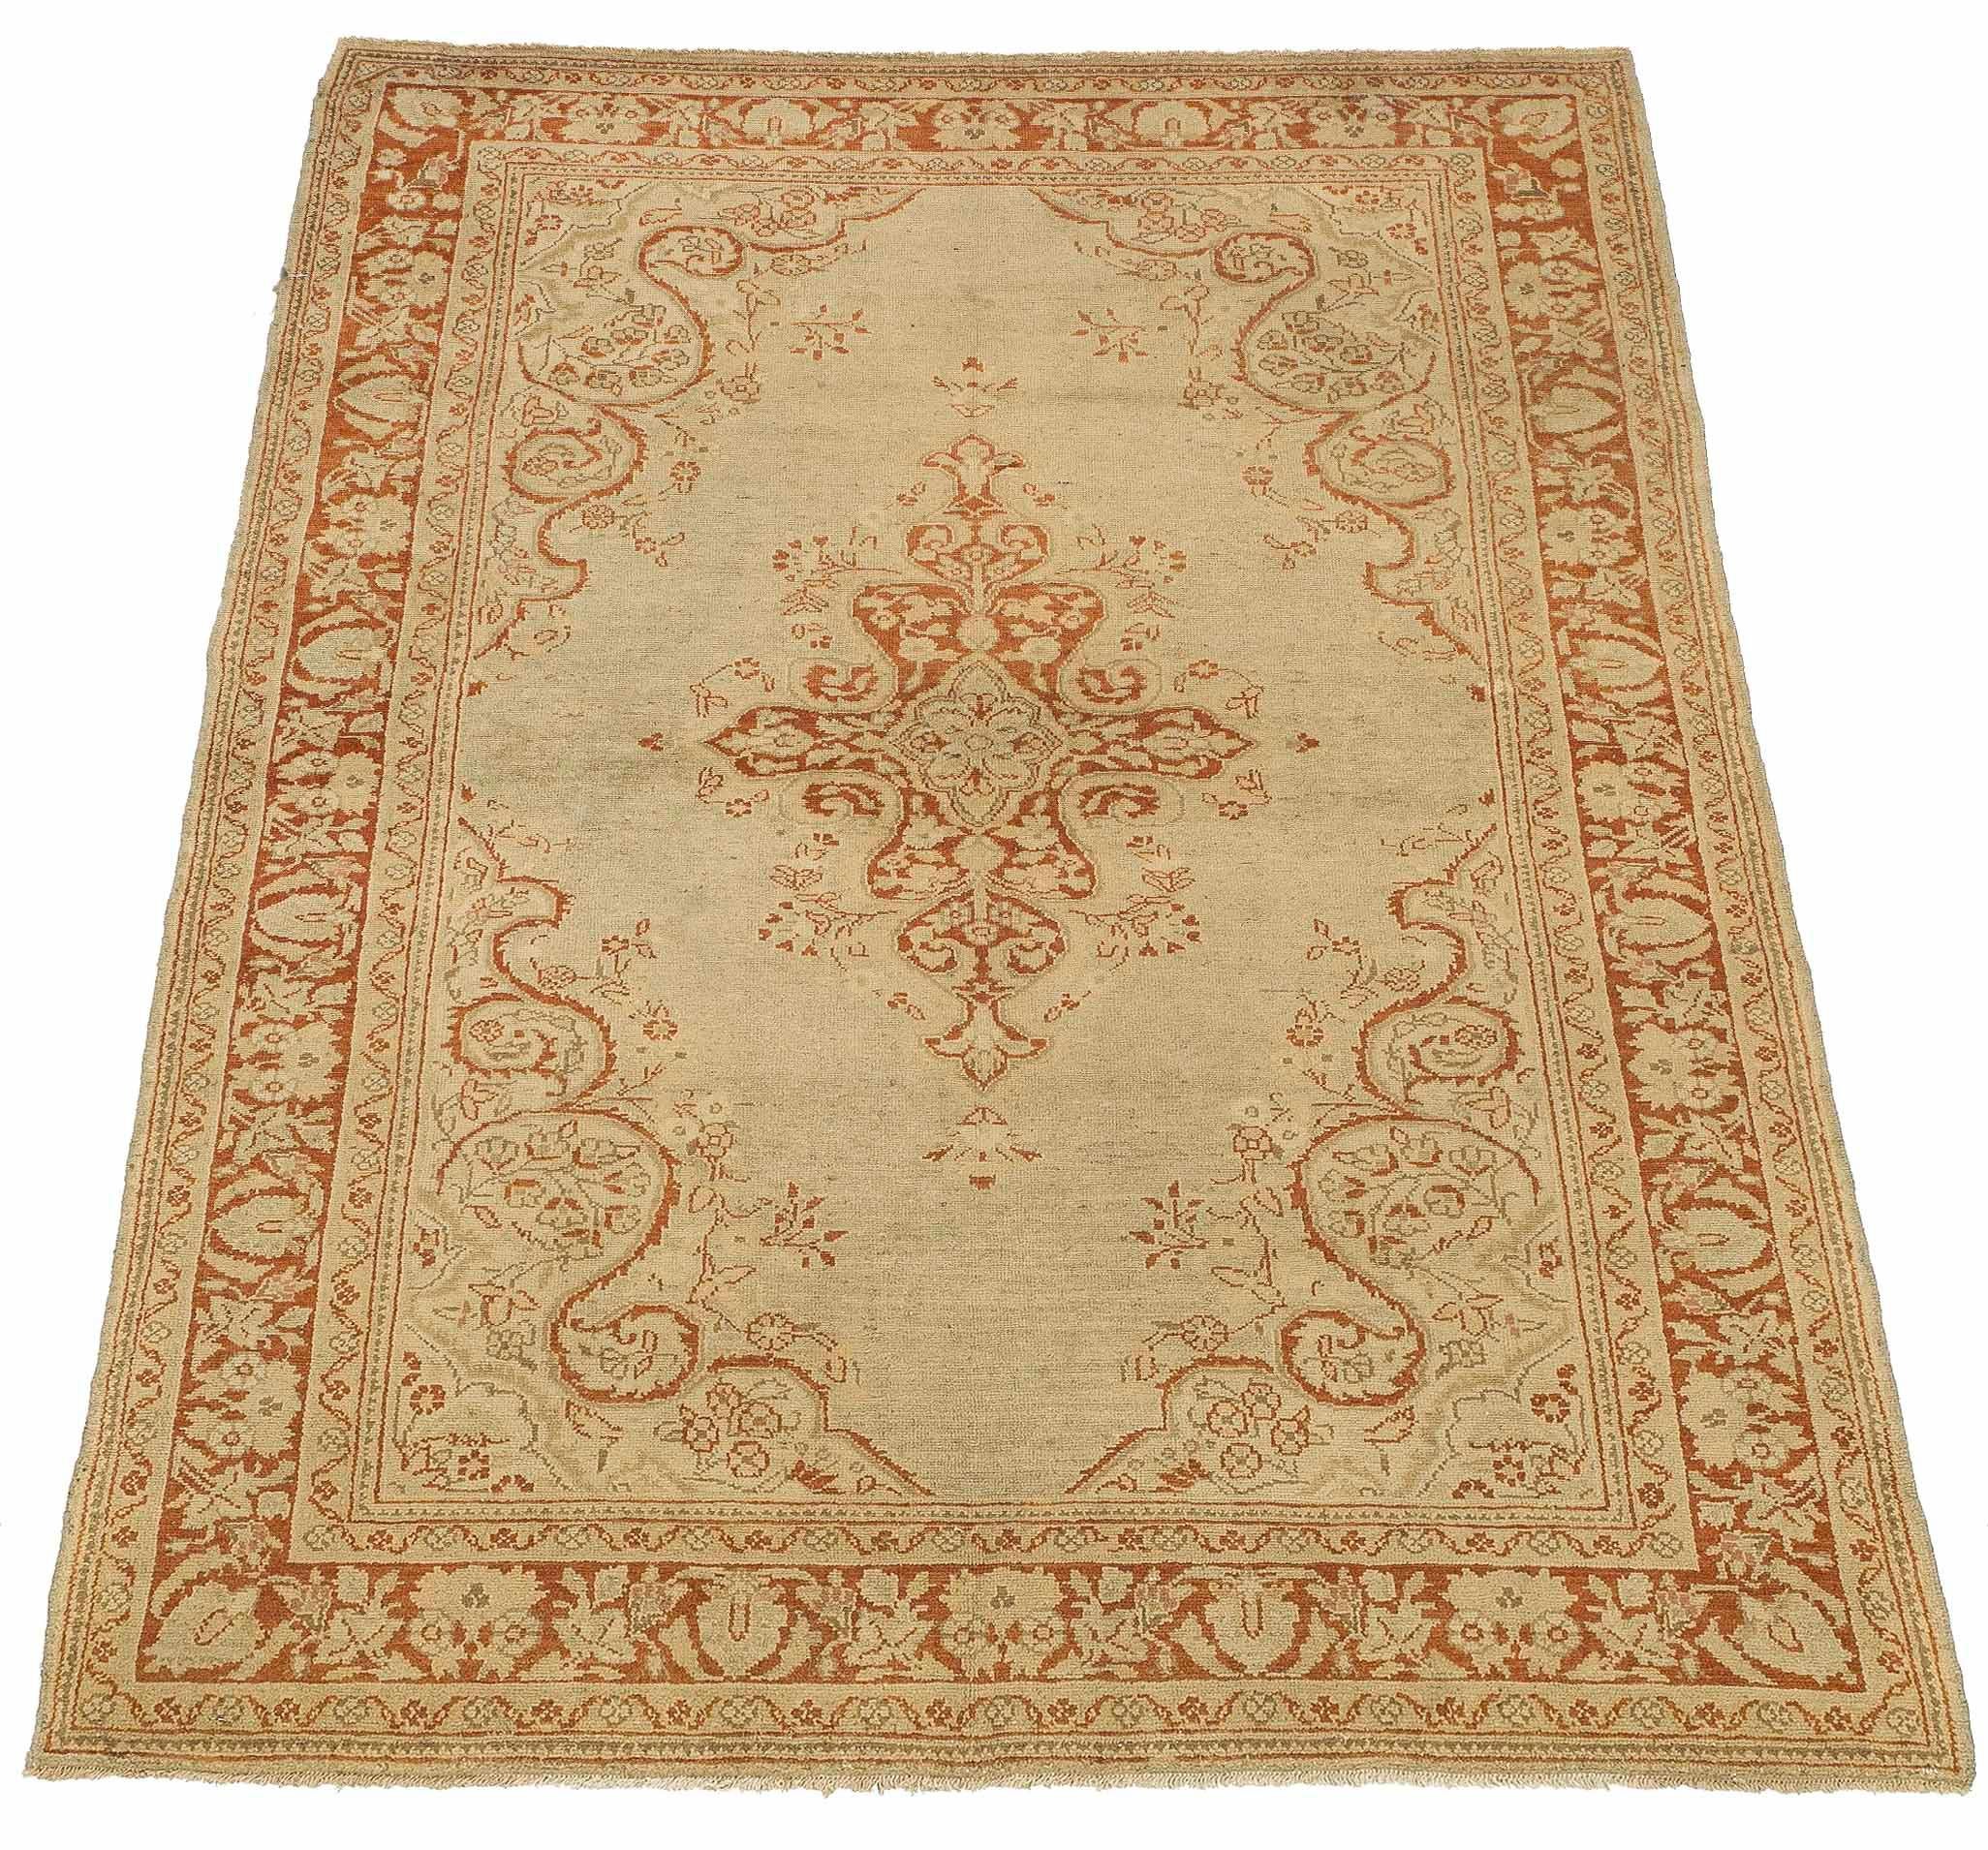 Antique Persian rug handwoven from the finest sheep’s wool and colored with all-natural vegetable dyes that are safe for humans and pets. It’s a traditional Khamseh design featuring a gorgeous mix of pink, beige, and ivory tribal details on a brown